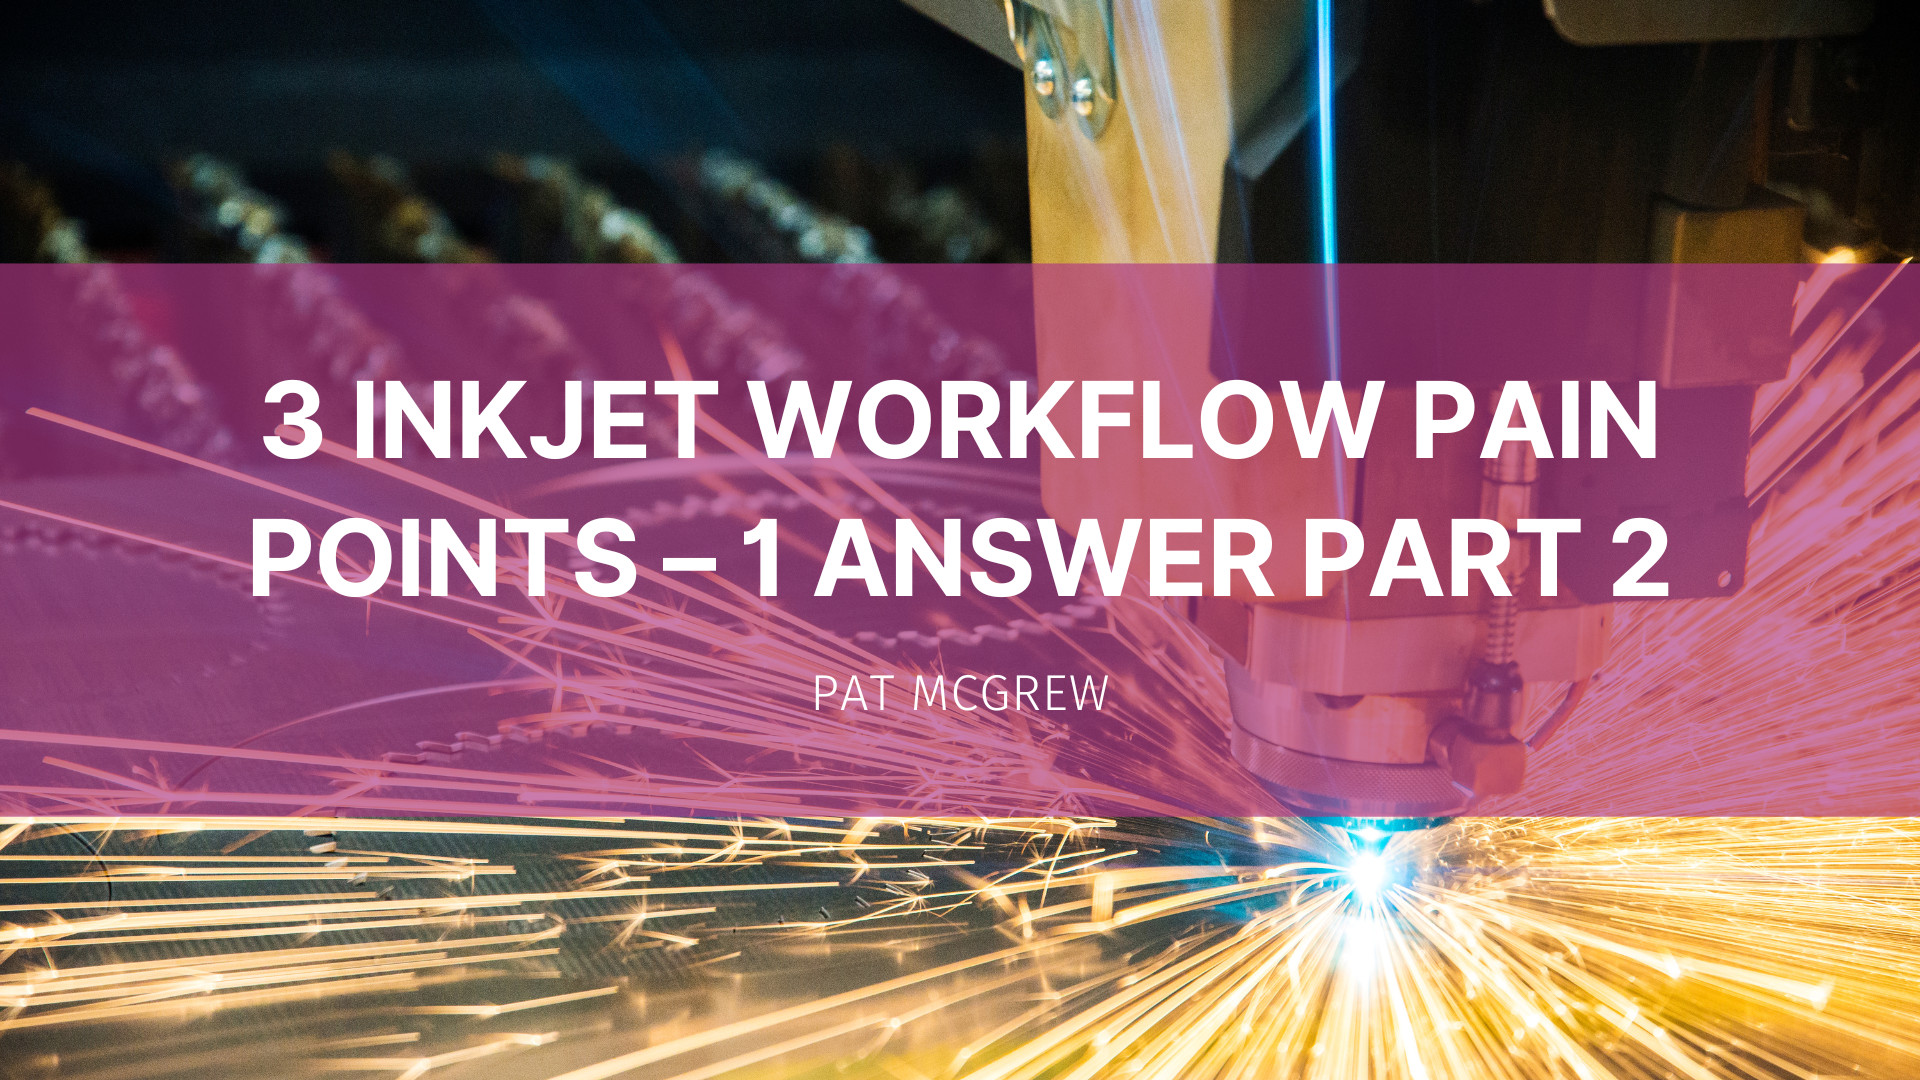 Featured image for “3 Inkjet Workflow Pain Points – 1 Answer Part 2”